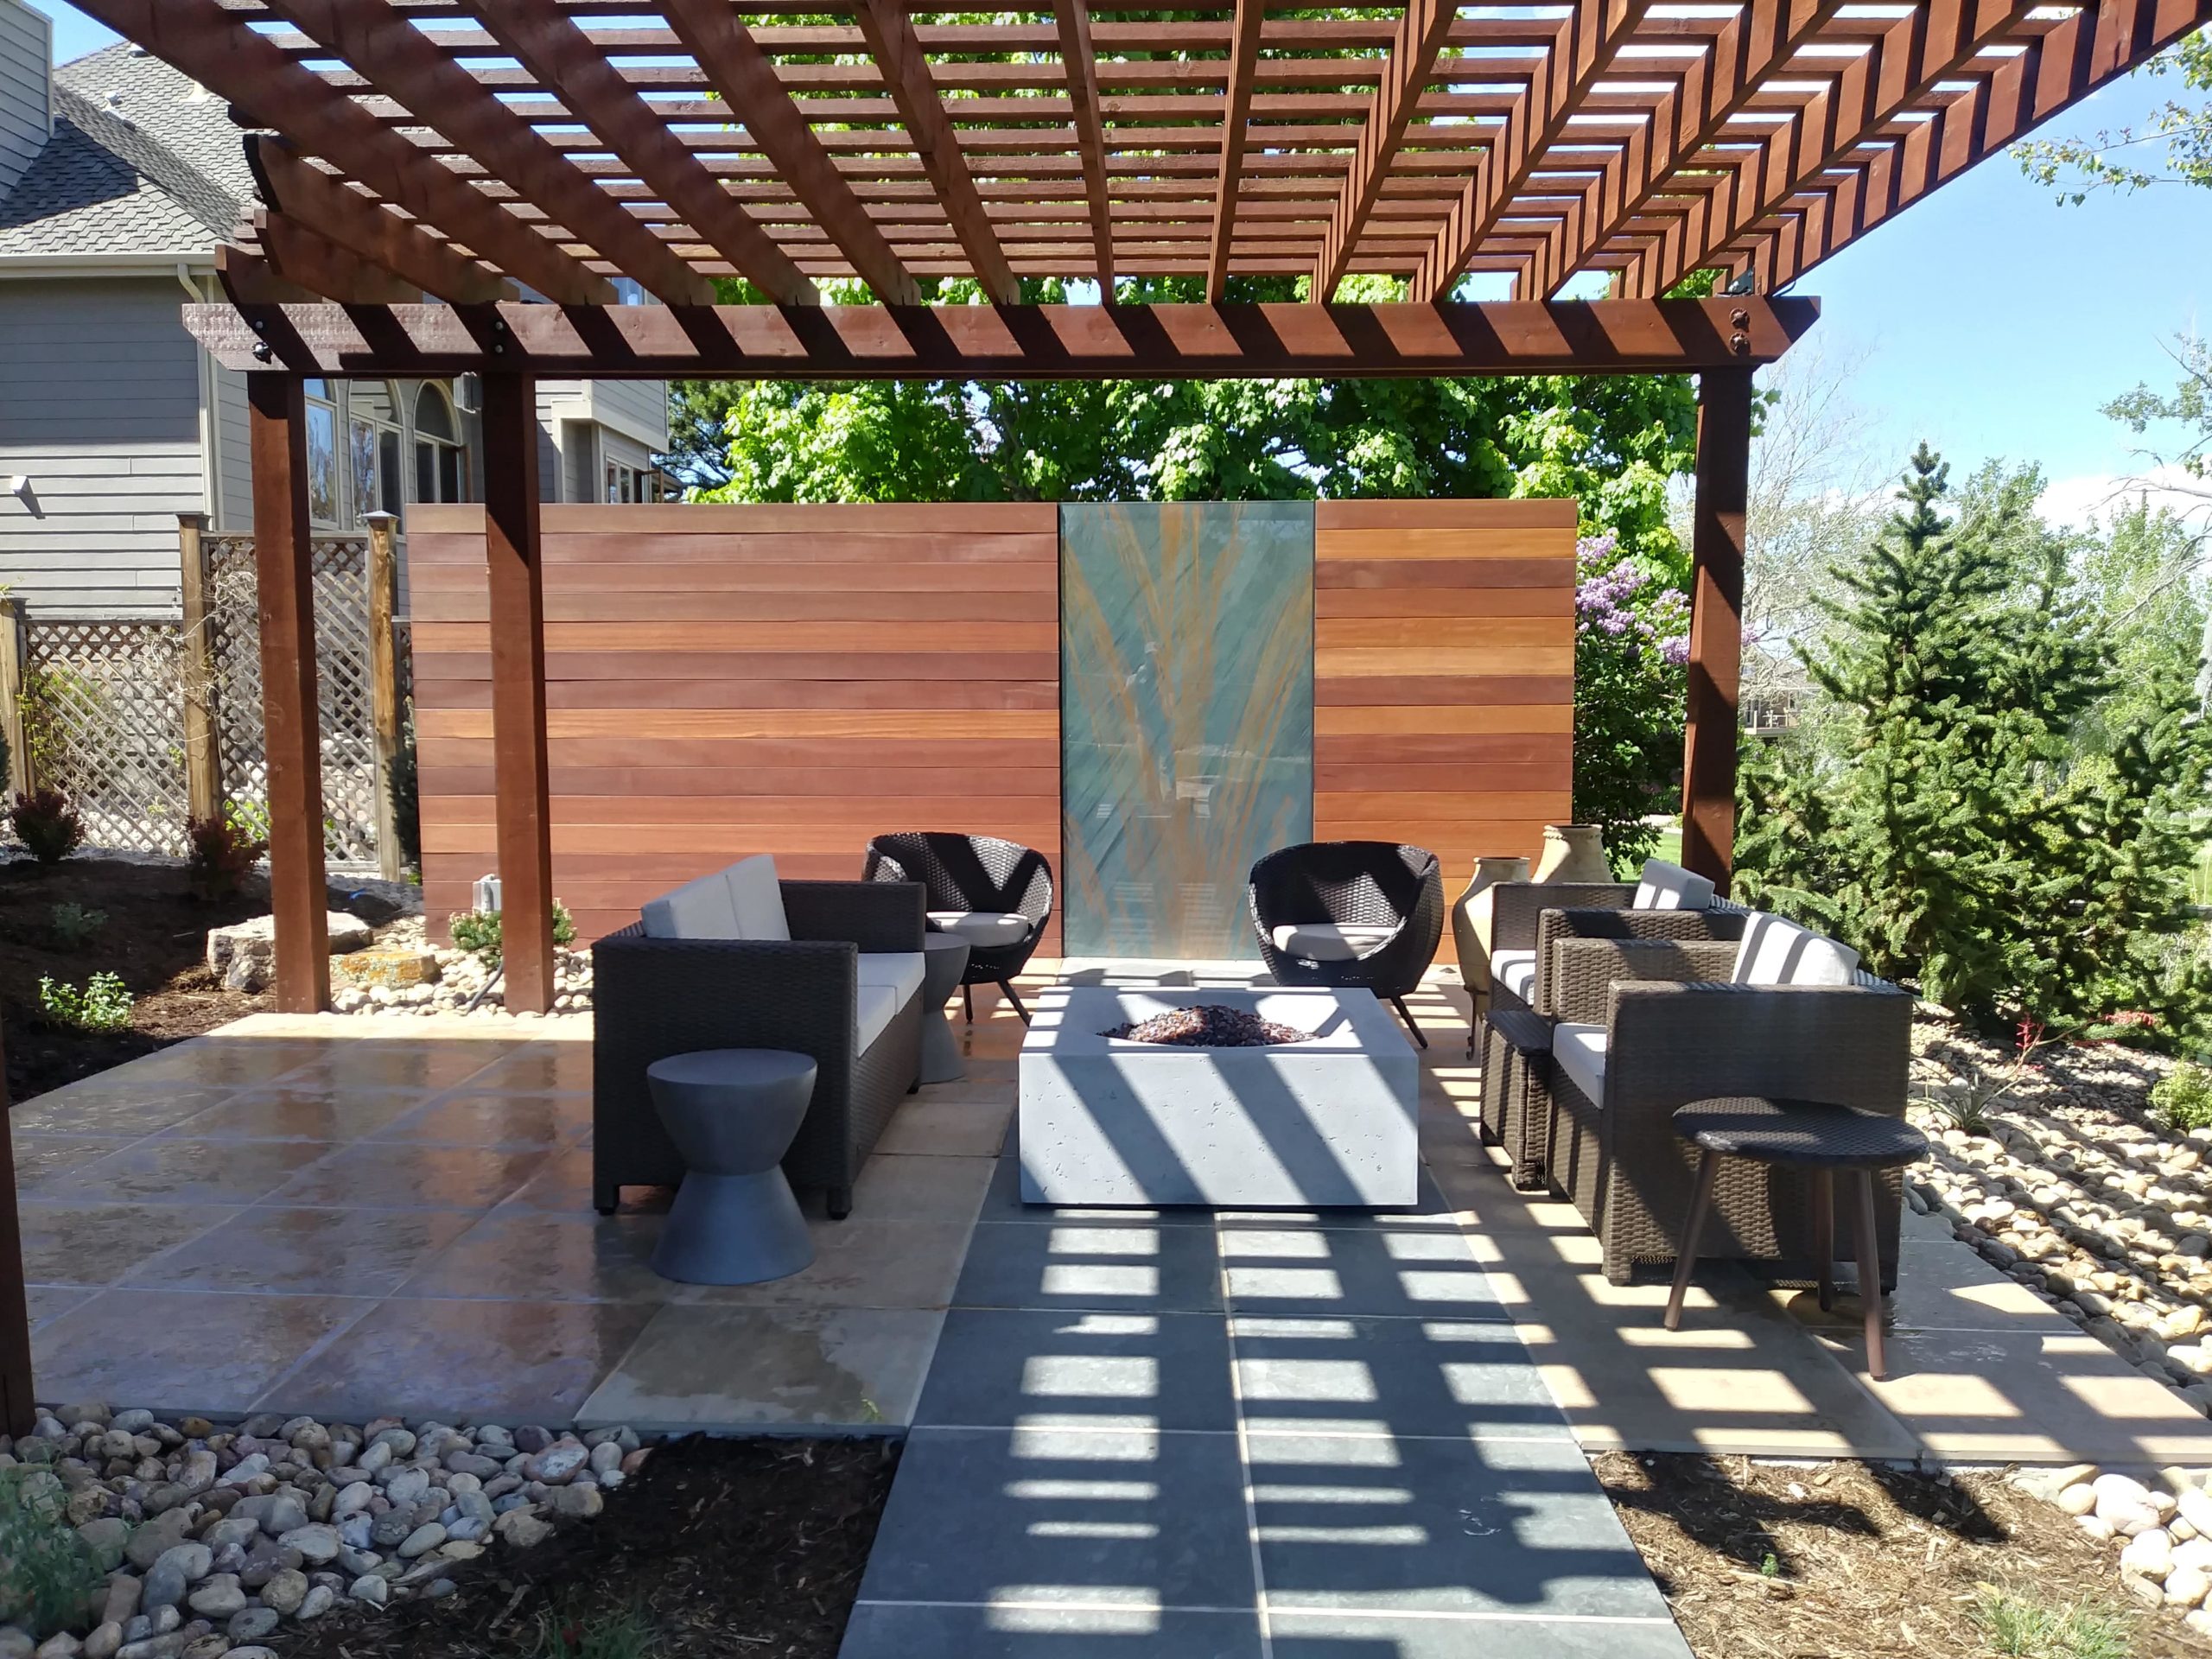 Concrete bowl fire pit with pergola and flat stone patio.